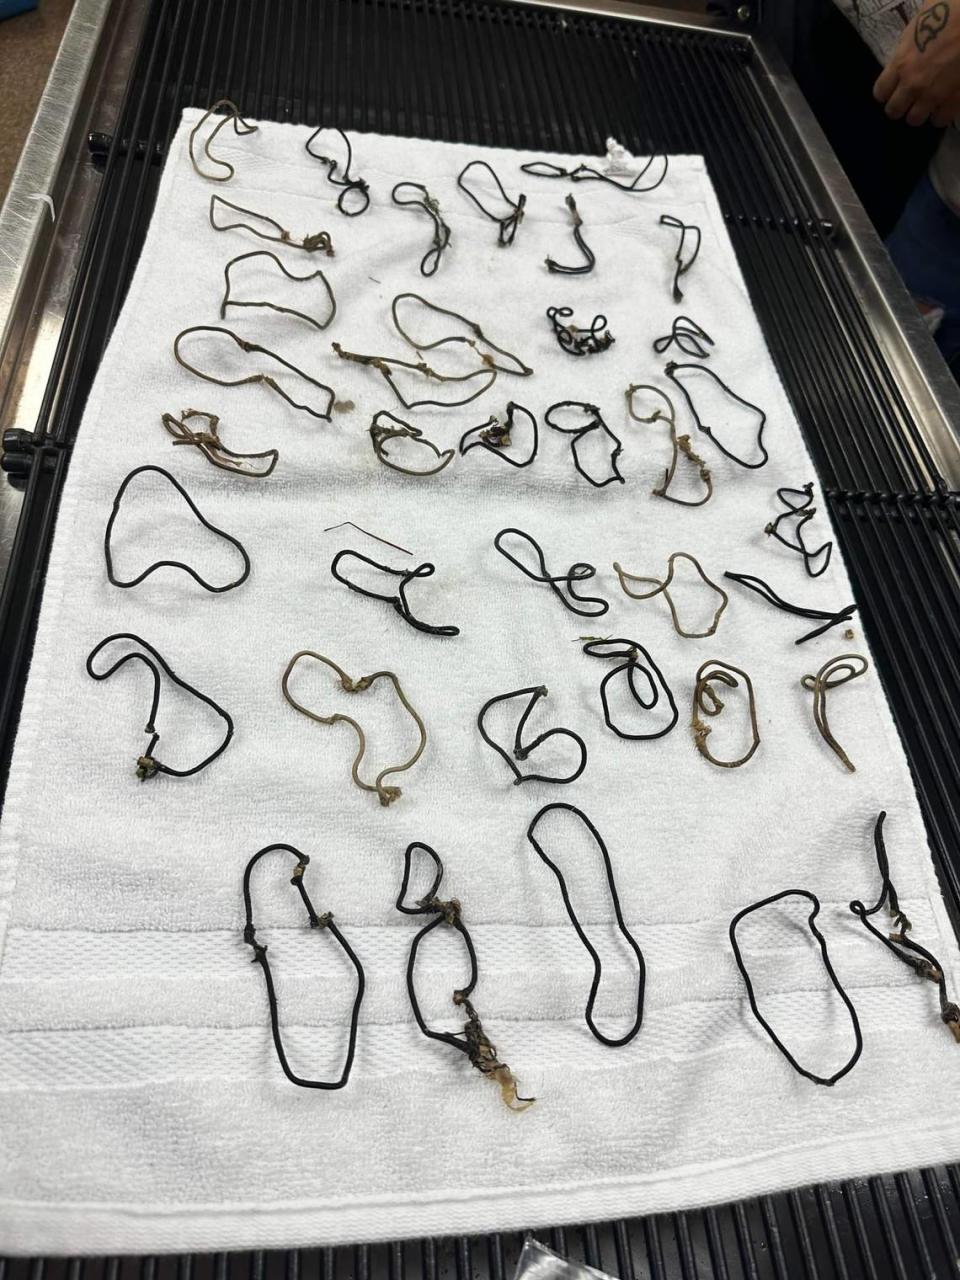 After veterinarians removed the “seemingly endless bundle of strings,” they counted 38 hair ties, Charleston Animal Society said.